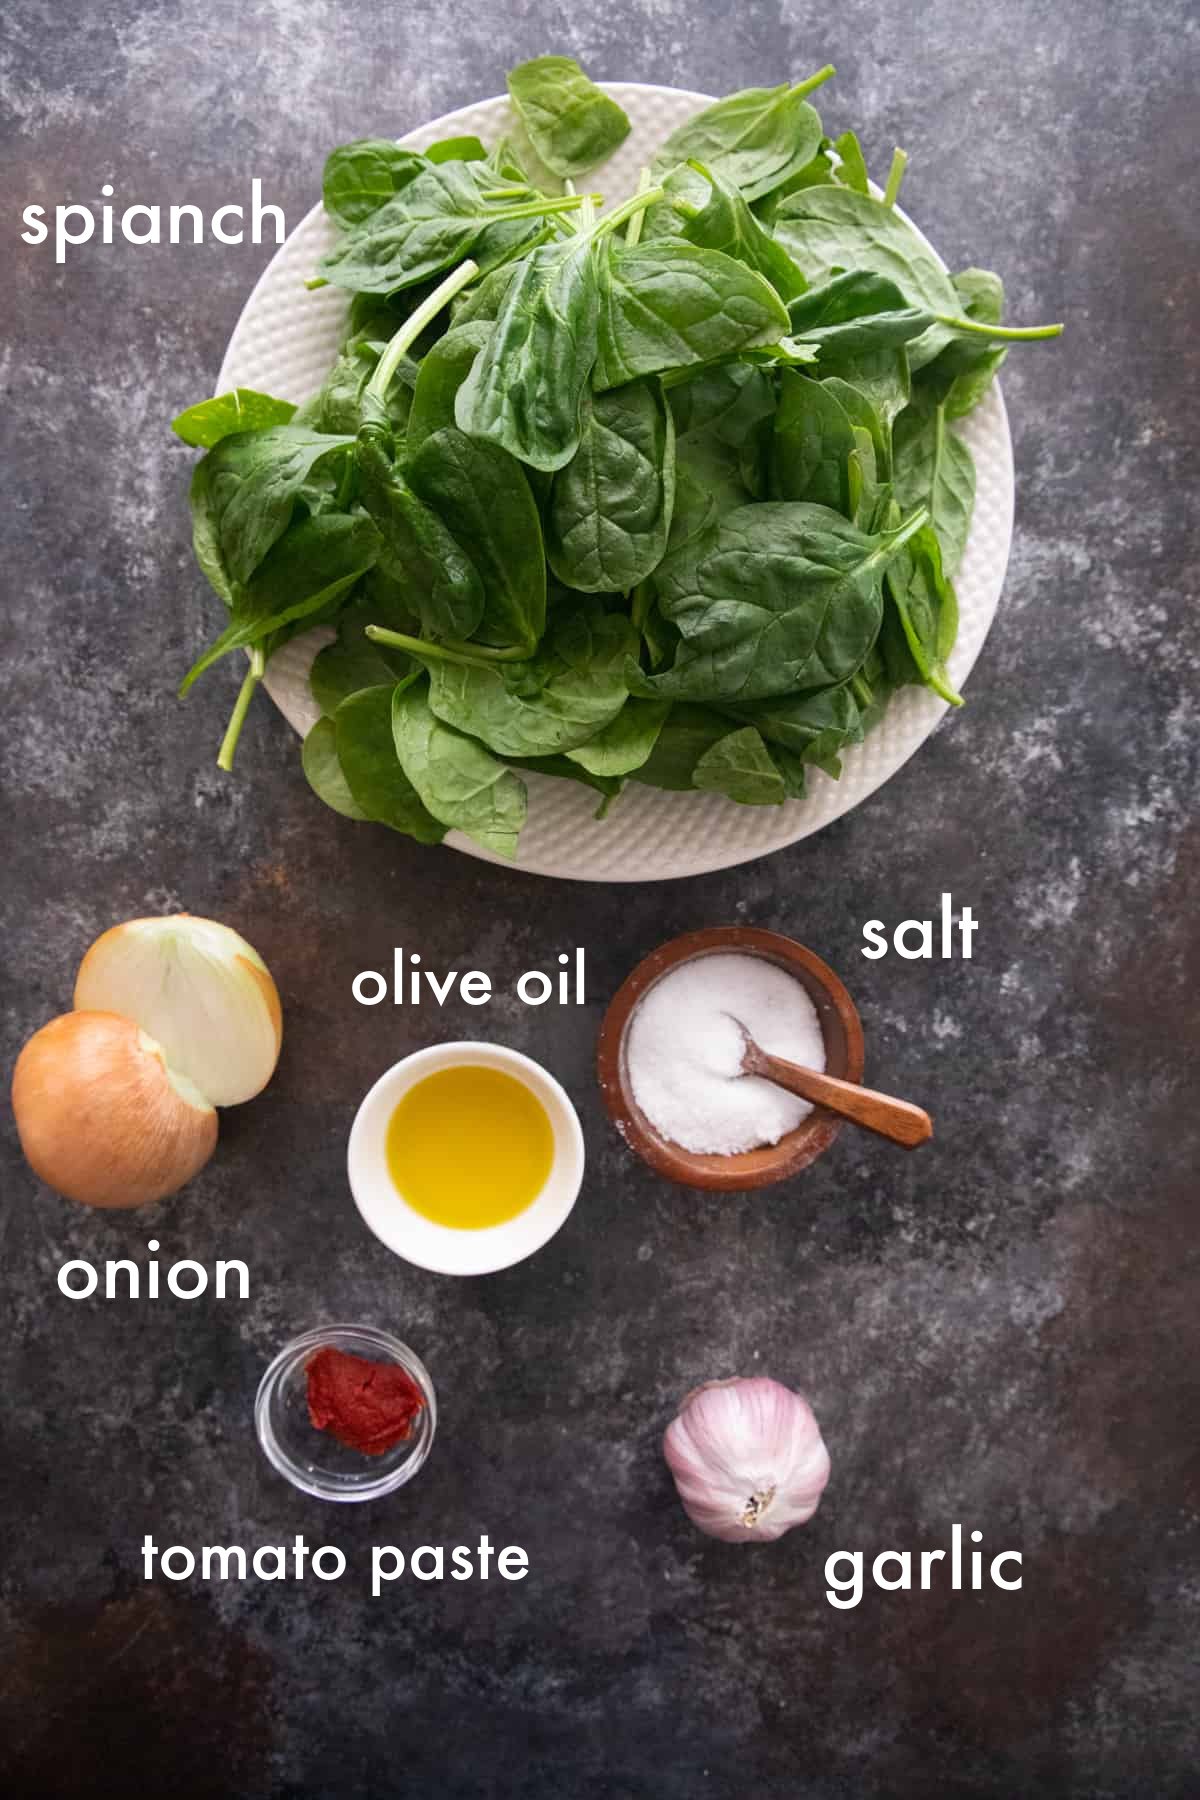 you need spinach, olive oil, tomato paste, onion, garlic and salt for this recipe. 